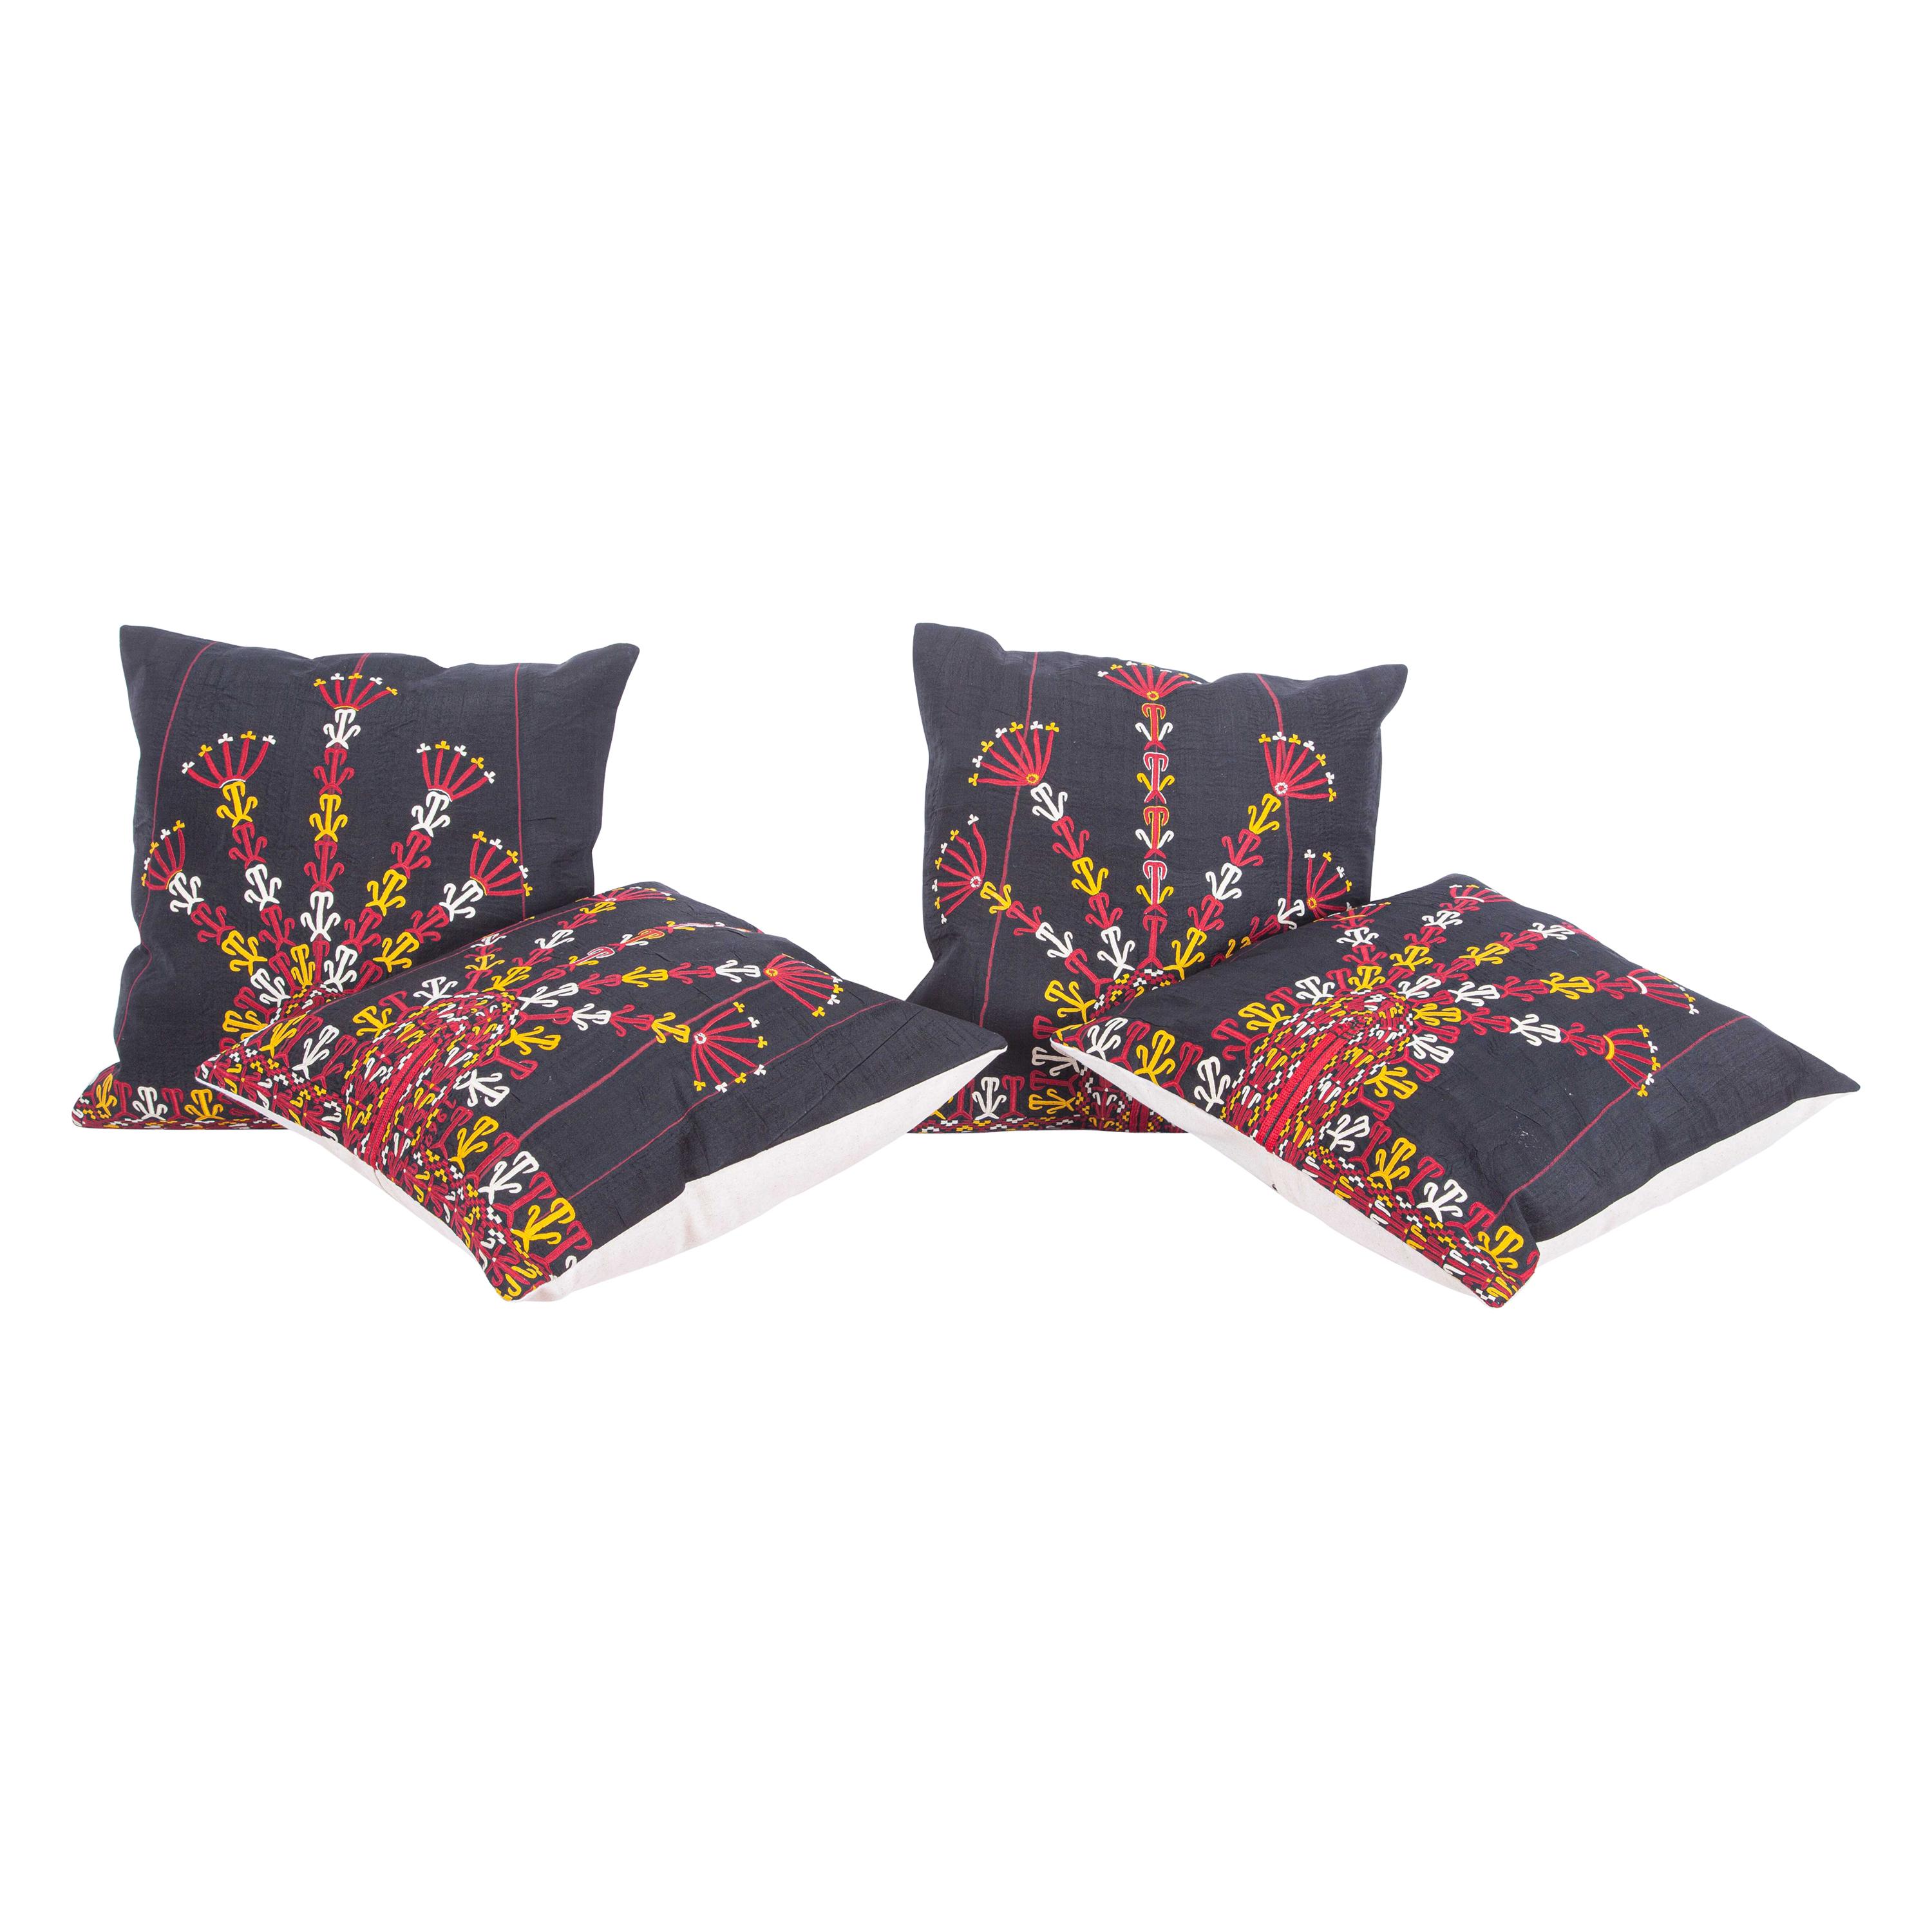 Pillow Cases Fashioned from a Turkmen Tekke Tribe Embroidered Silk Coat